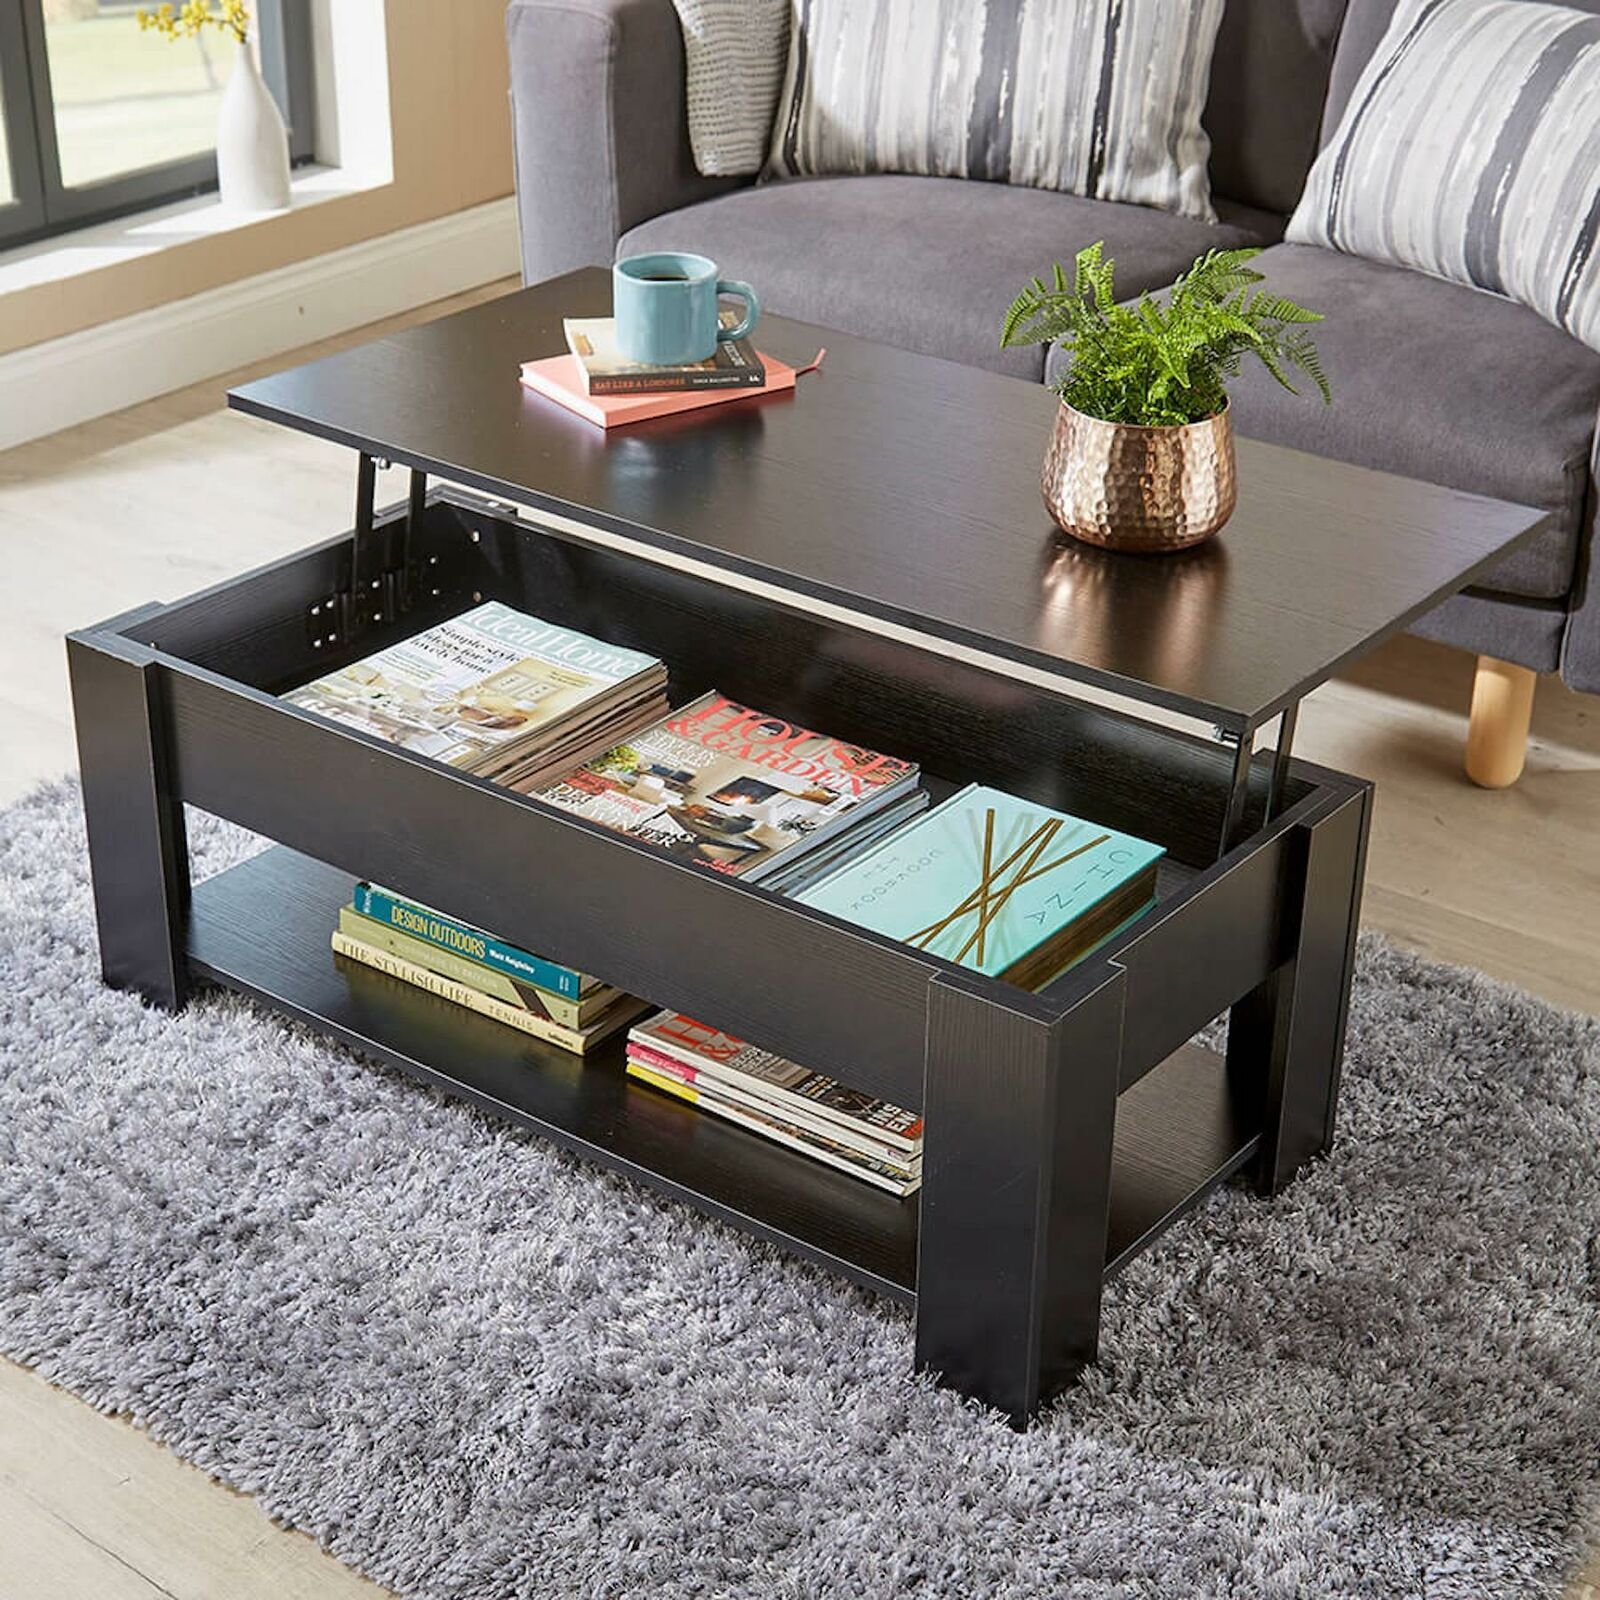 Black Wooden Coffee Table With Lift Up Top Storage Area And Magazine Shelf  5056065438000 | Ebay For Coffee Tables With Storage (View 18 of 20)